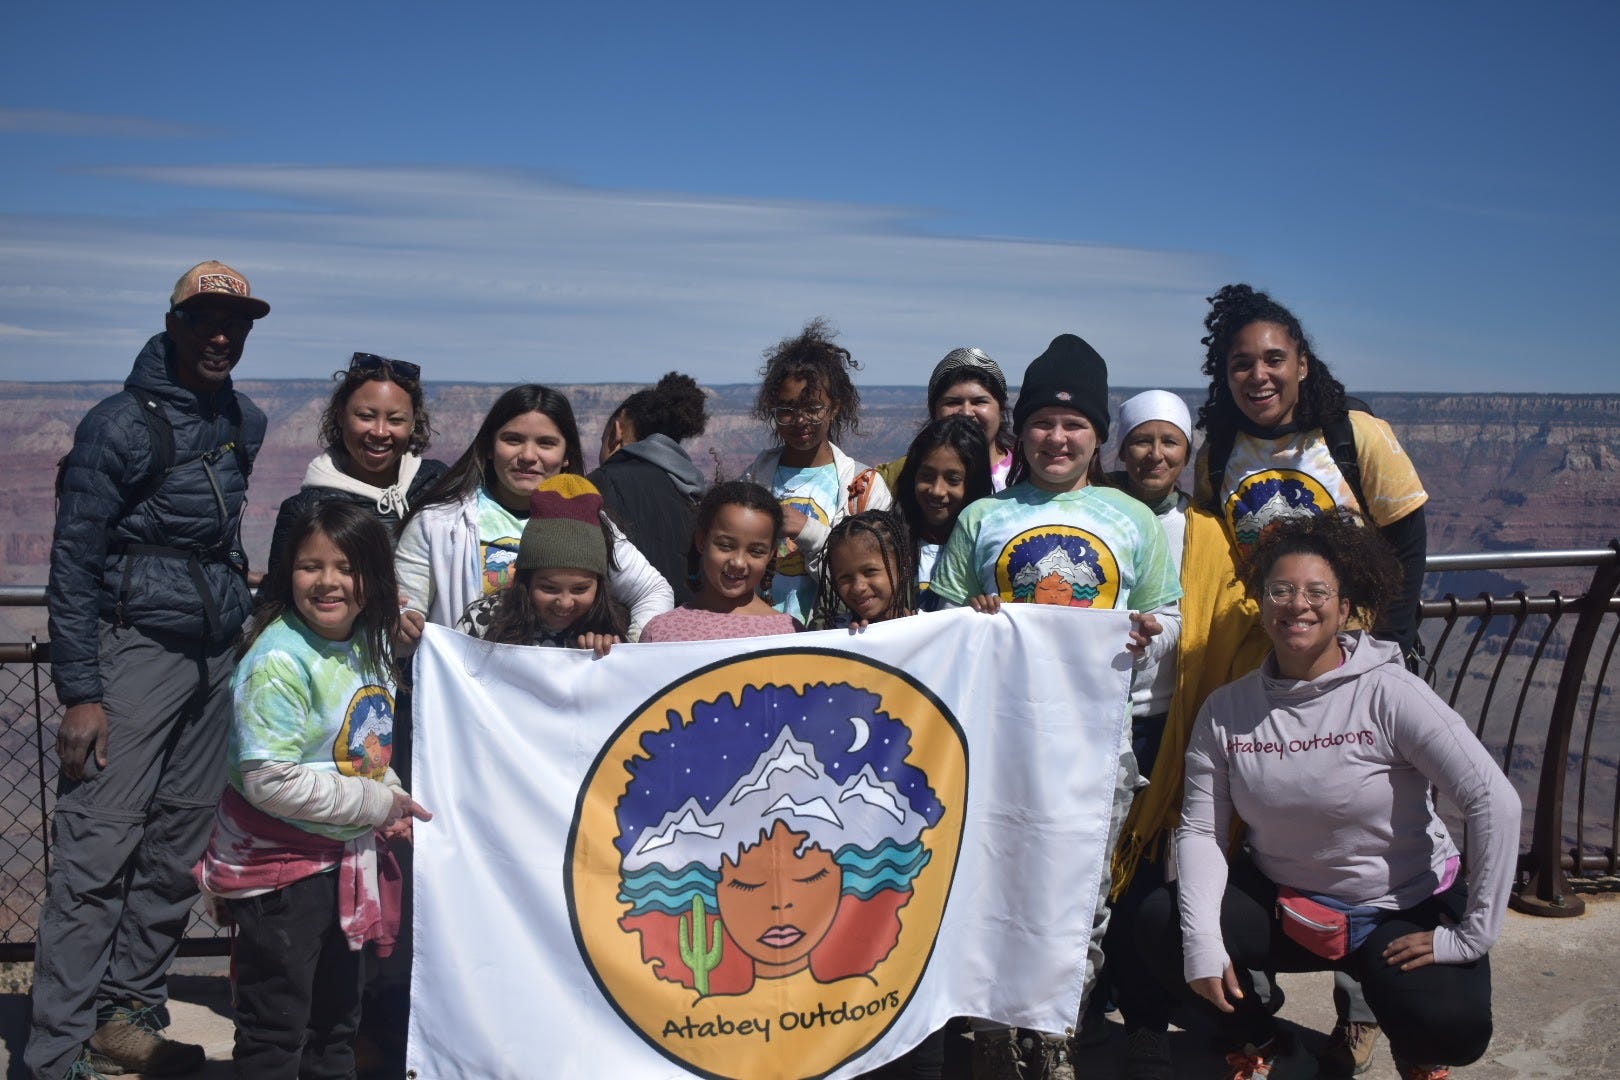 Atabey Outdoors's first annual Grand Canyon National Park camping trip in April took nine girls and several chaperones to the national park for the first time.